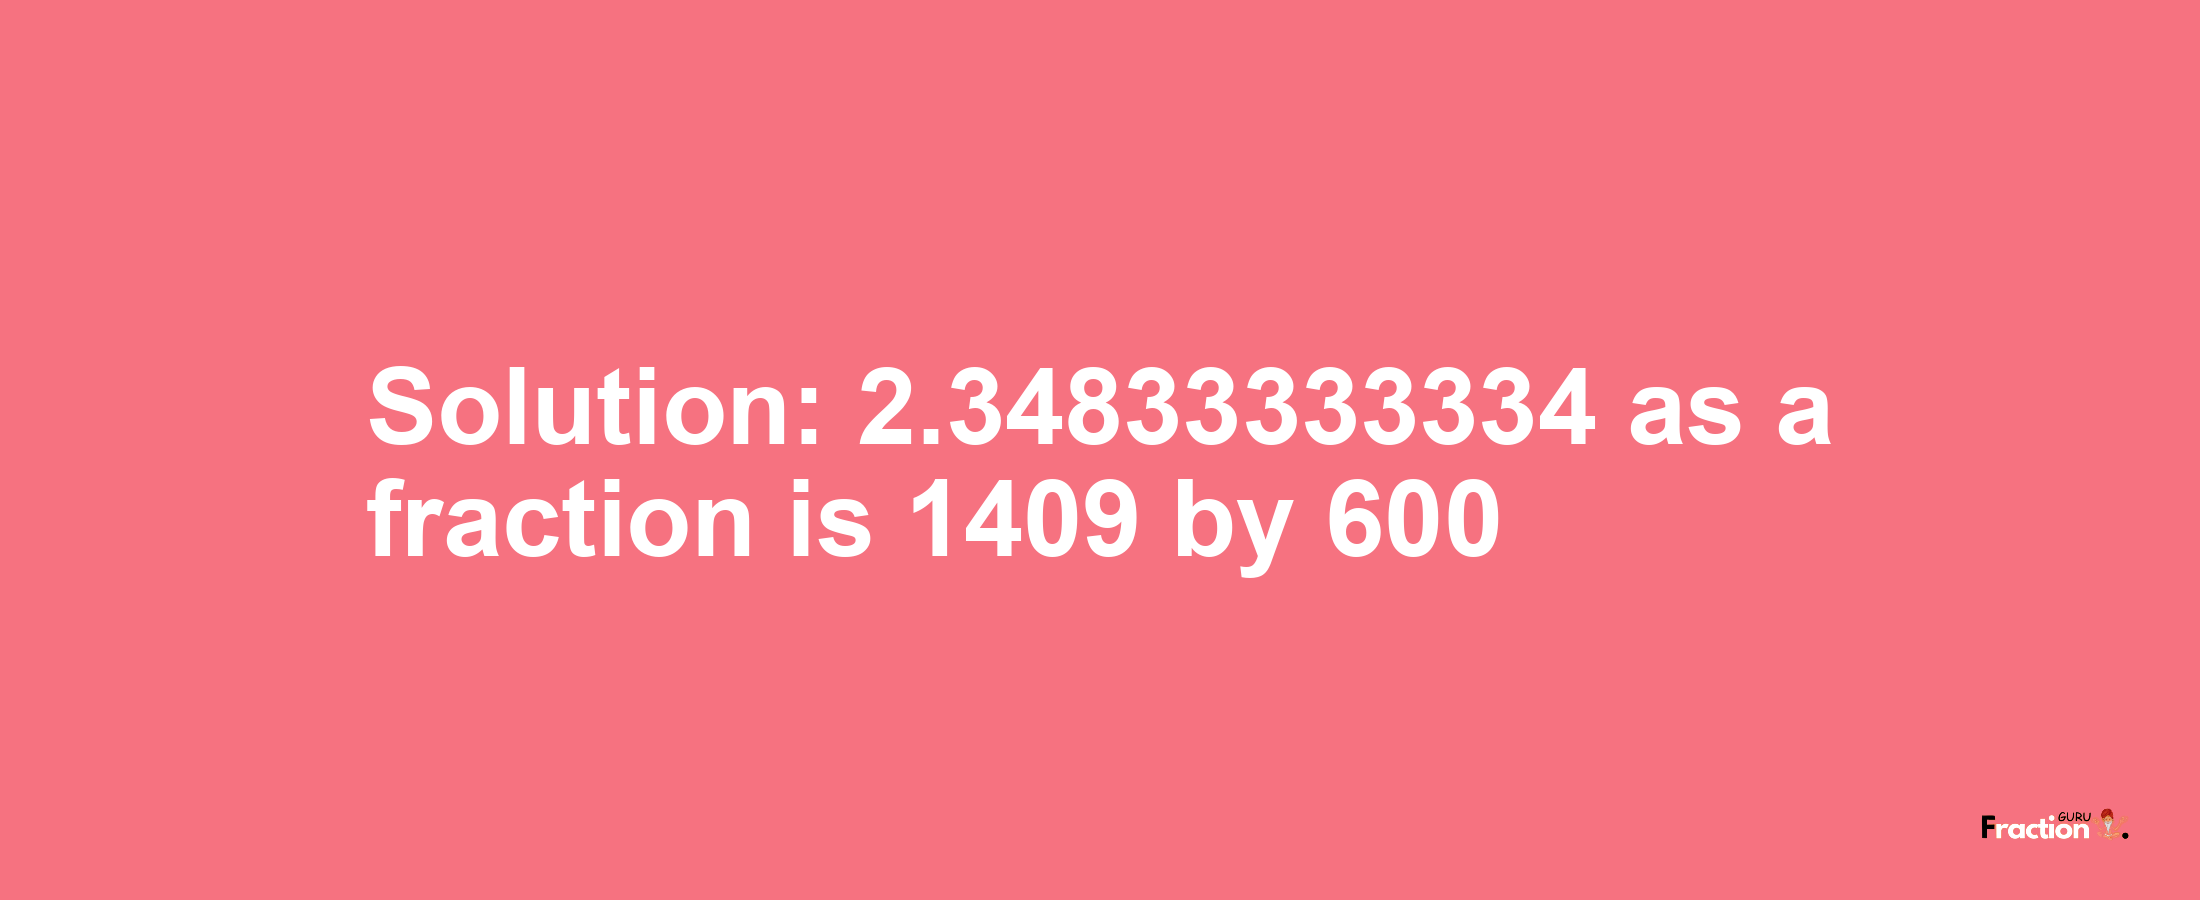 Solution:2.34833333334 as a fraction is 1409/600